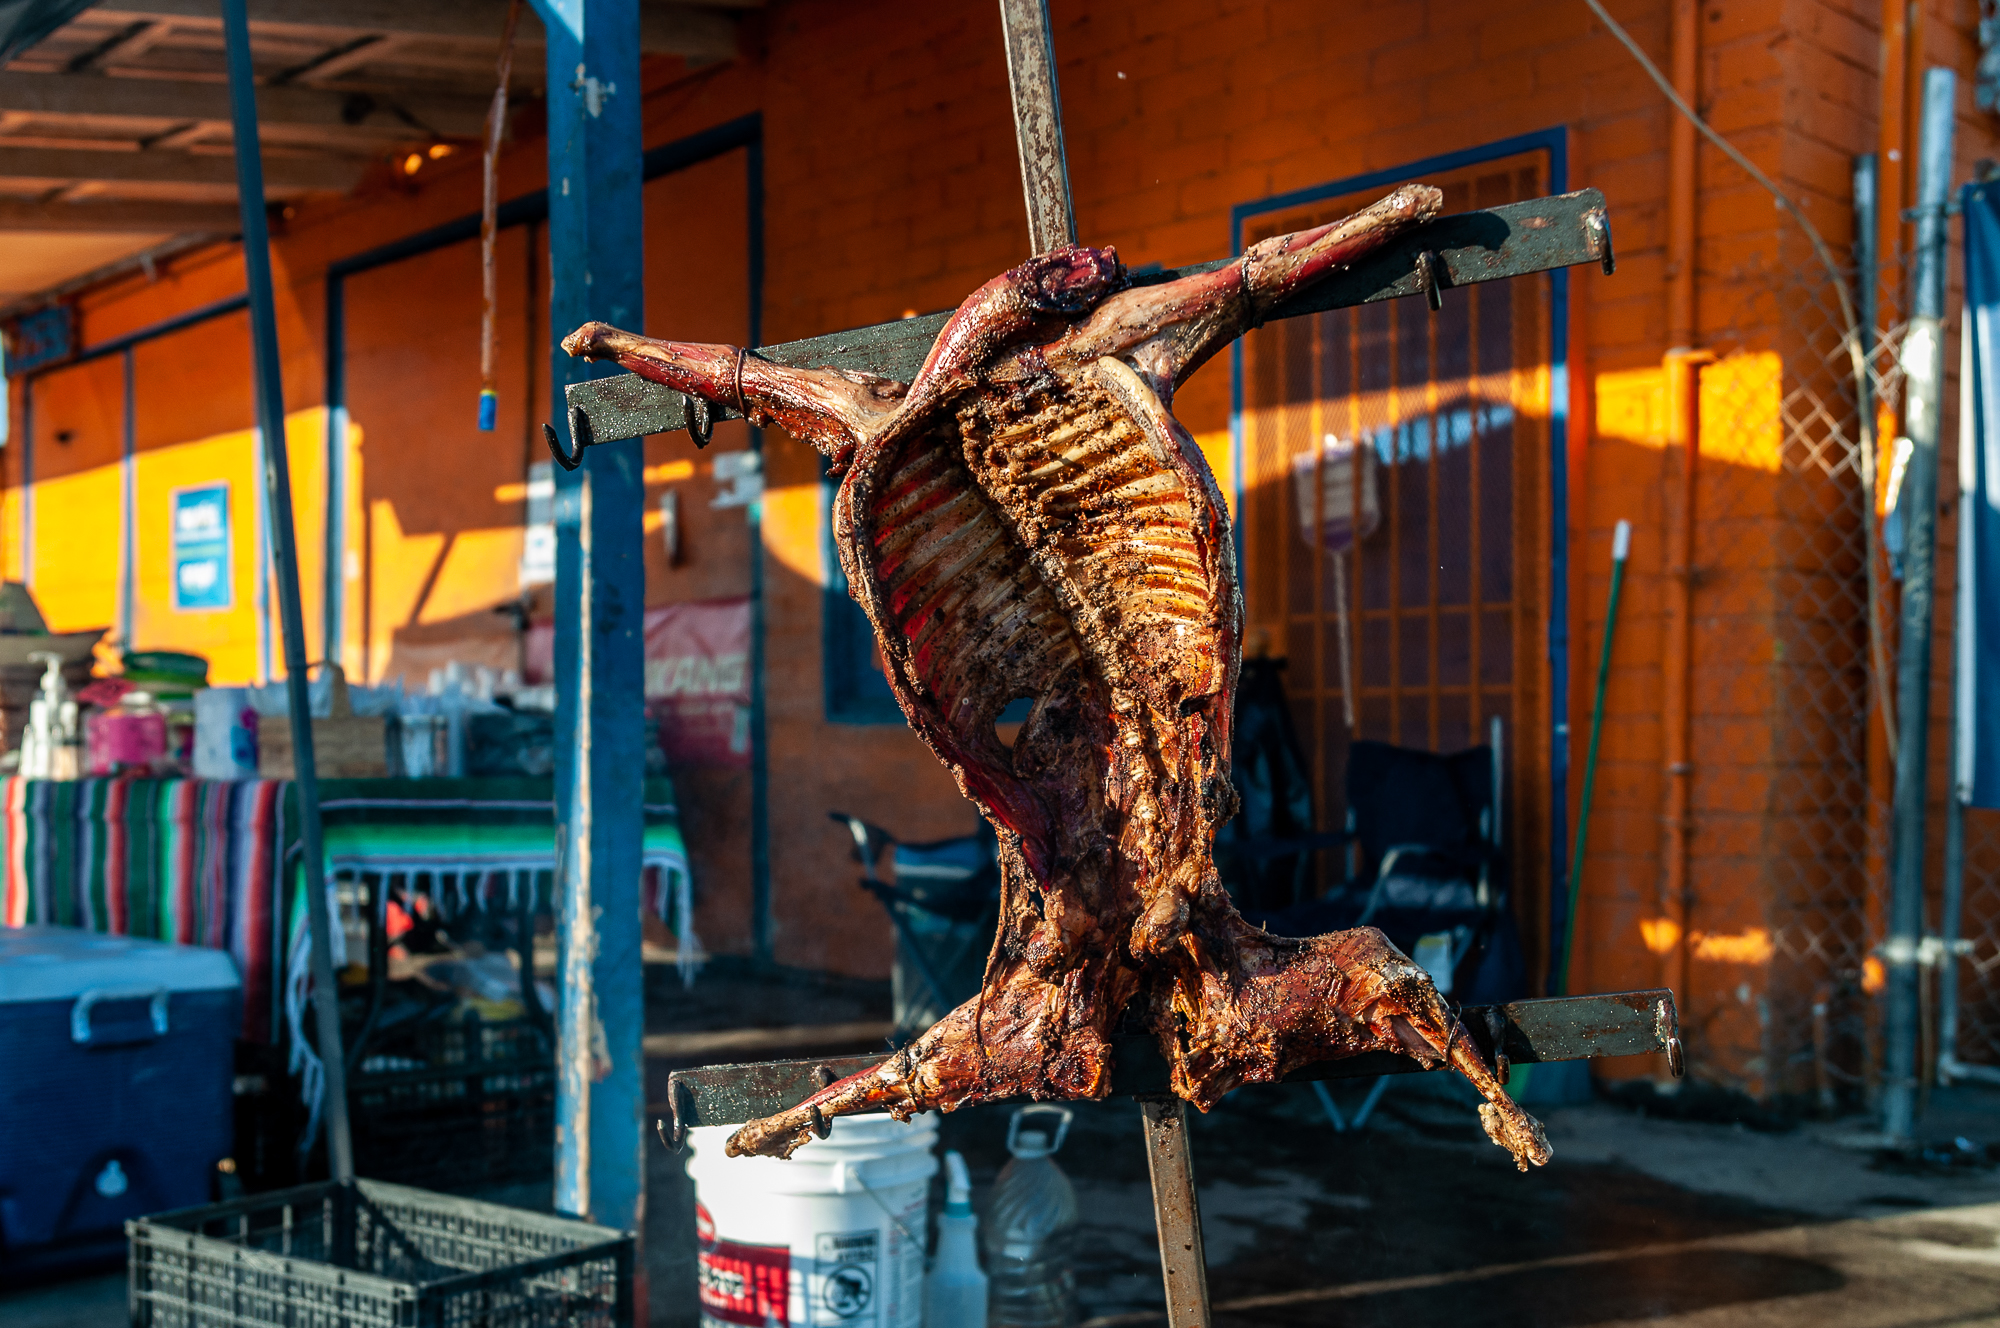 A goat mounted and roasted on a metal tube.